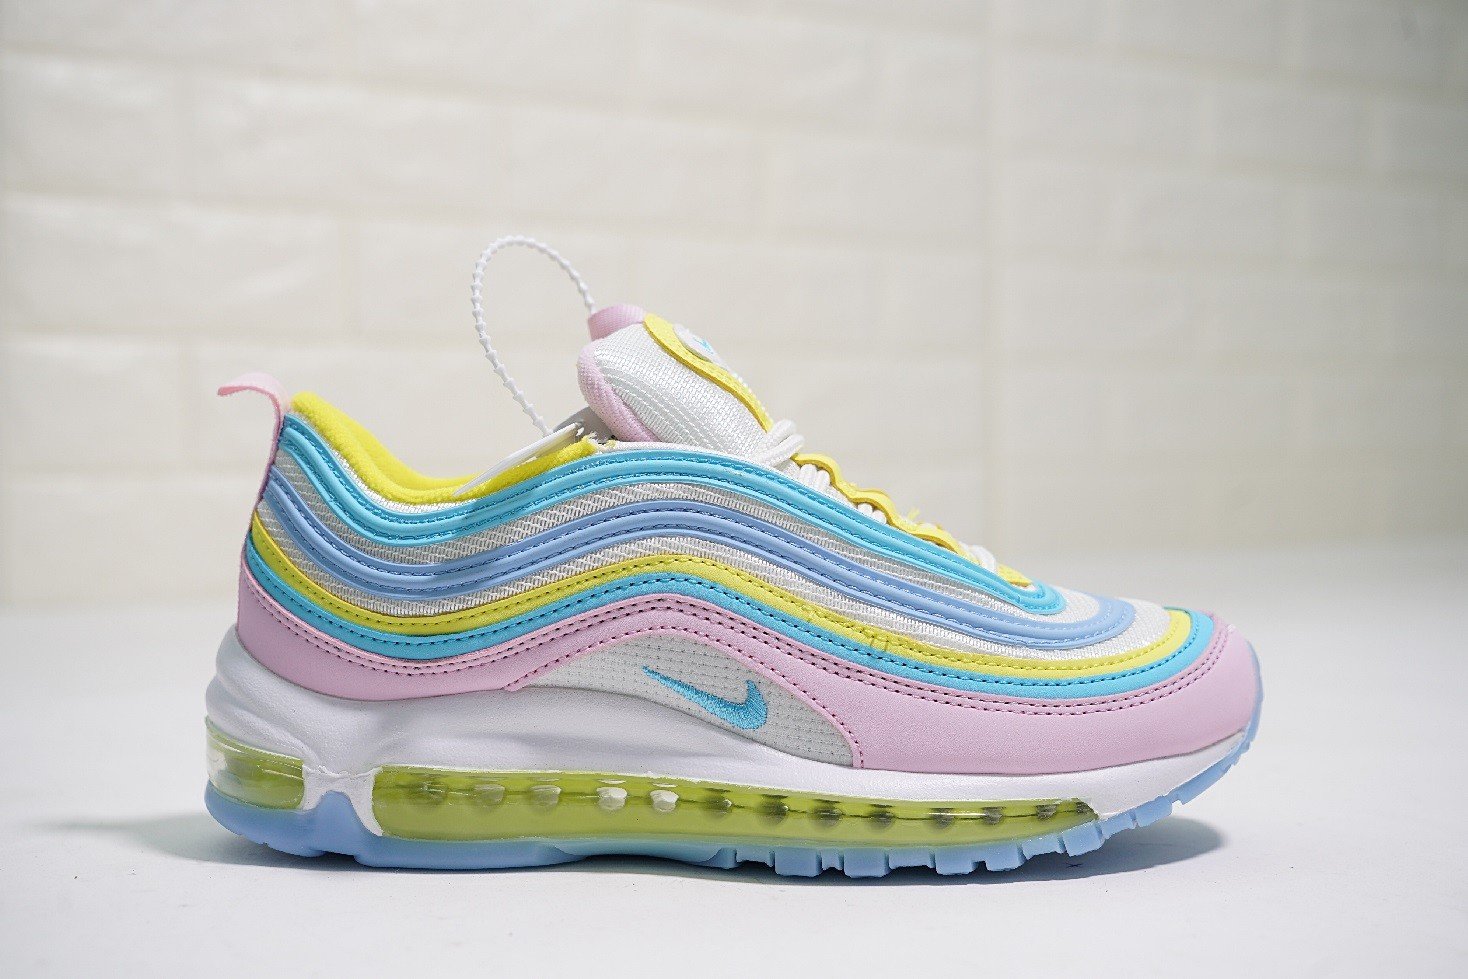 nike air max 97 womens blue and purple,Save up to 16%,www.masserv.com